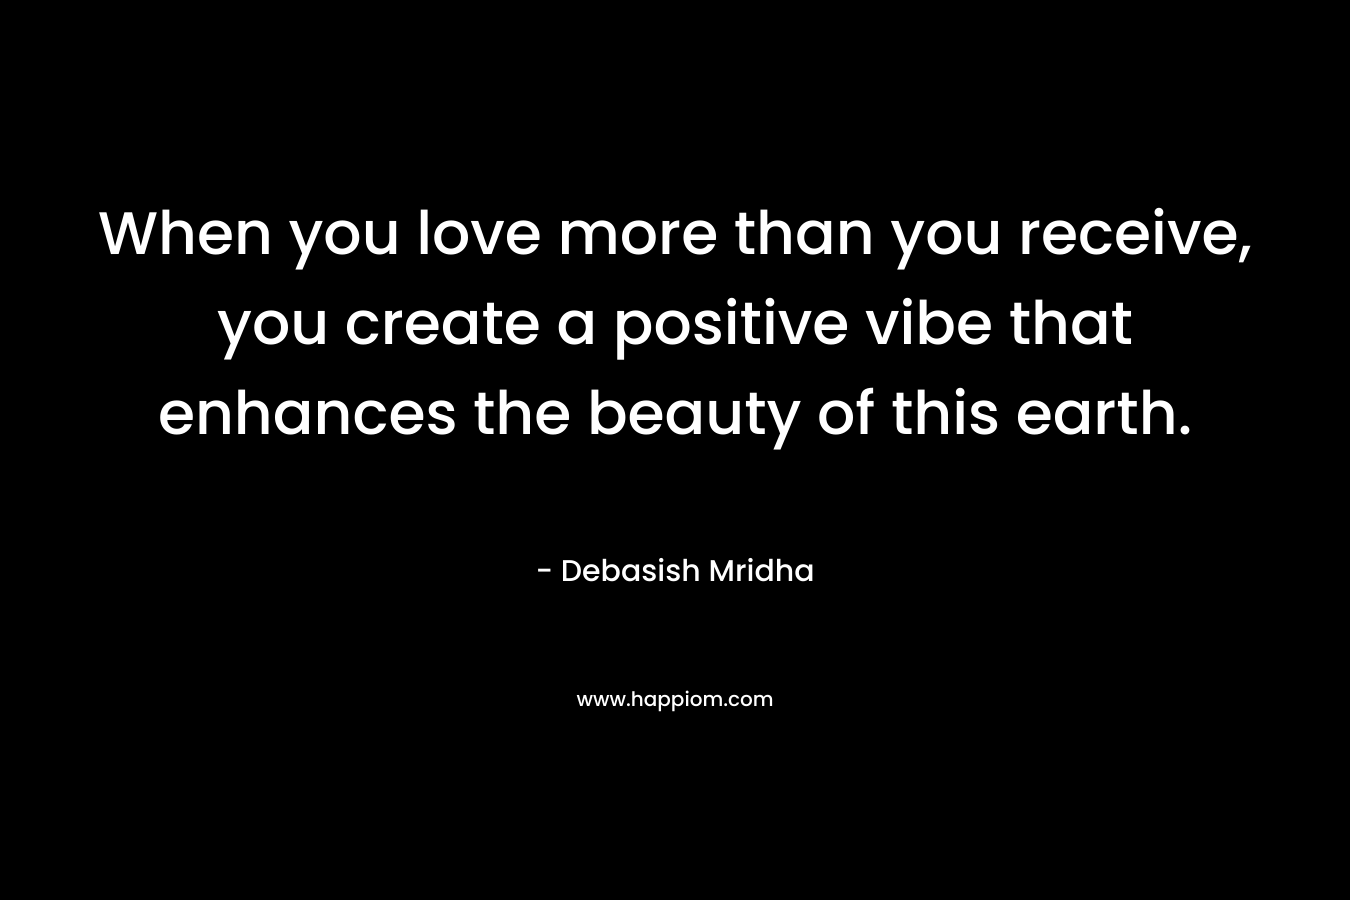 When you love more than you receive, you create a positive vibe that enhances the beauty of this earth. – Debasish Mridha